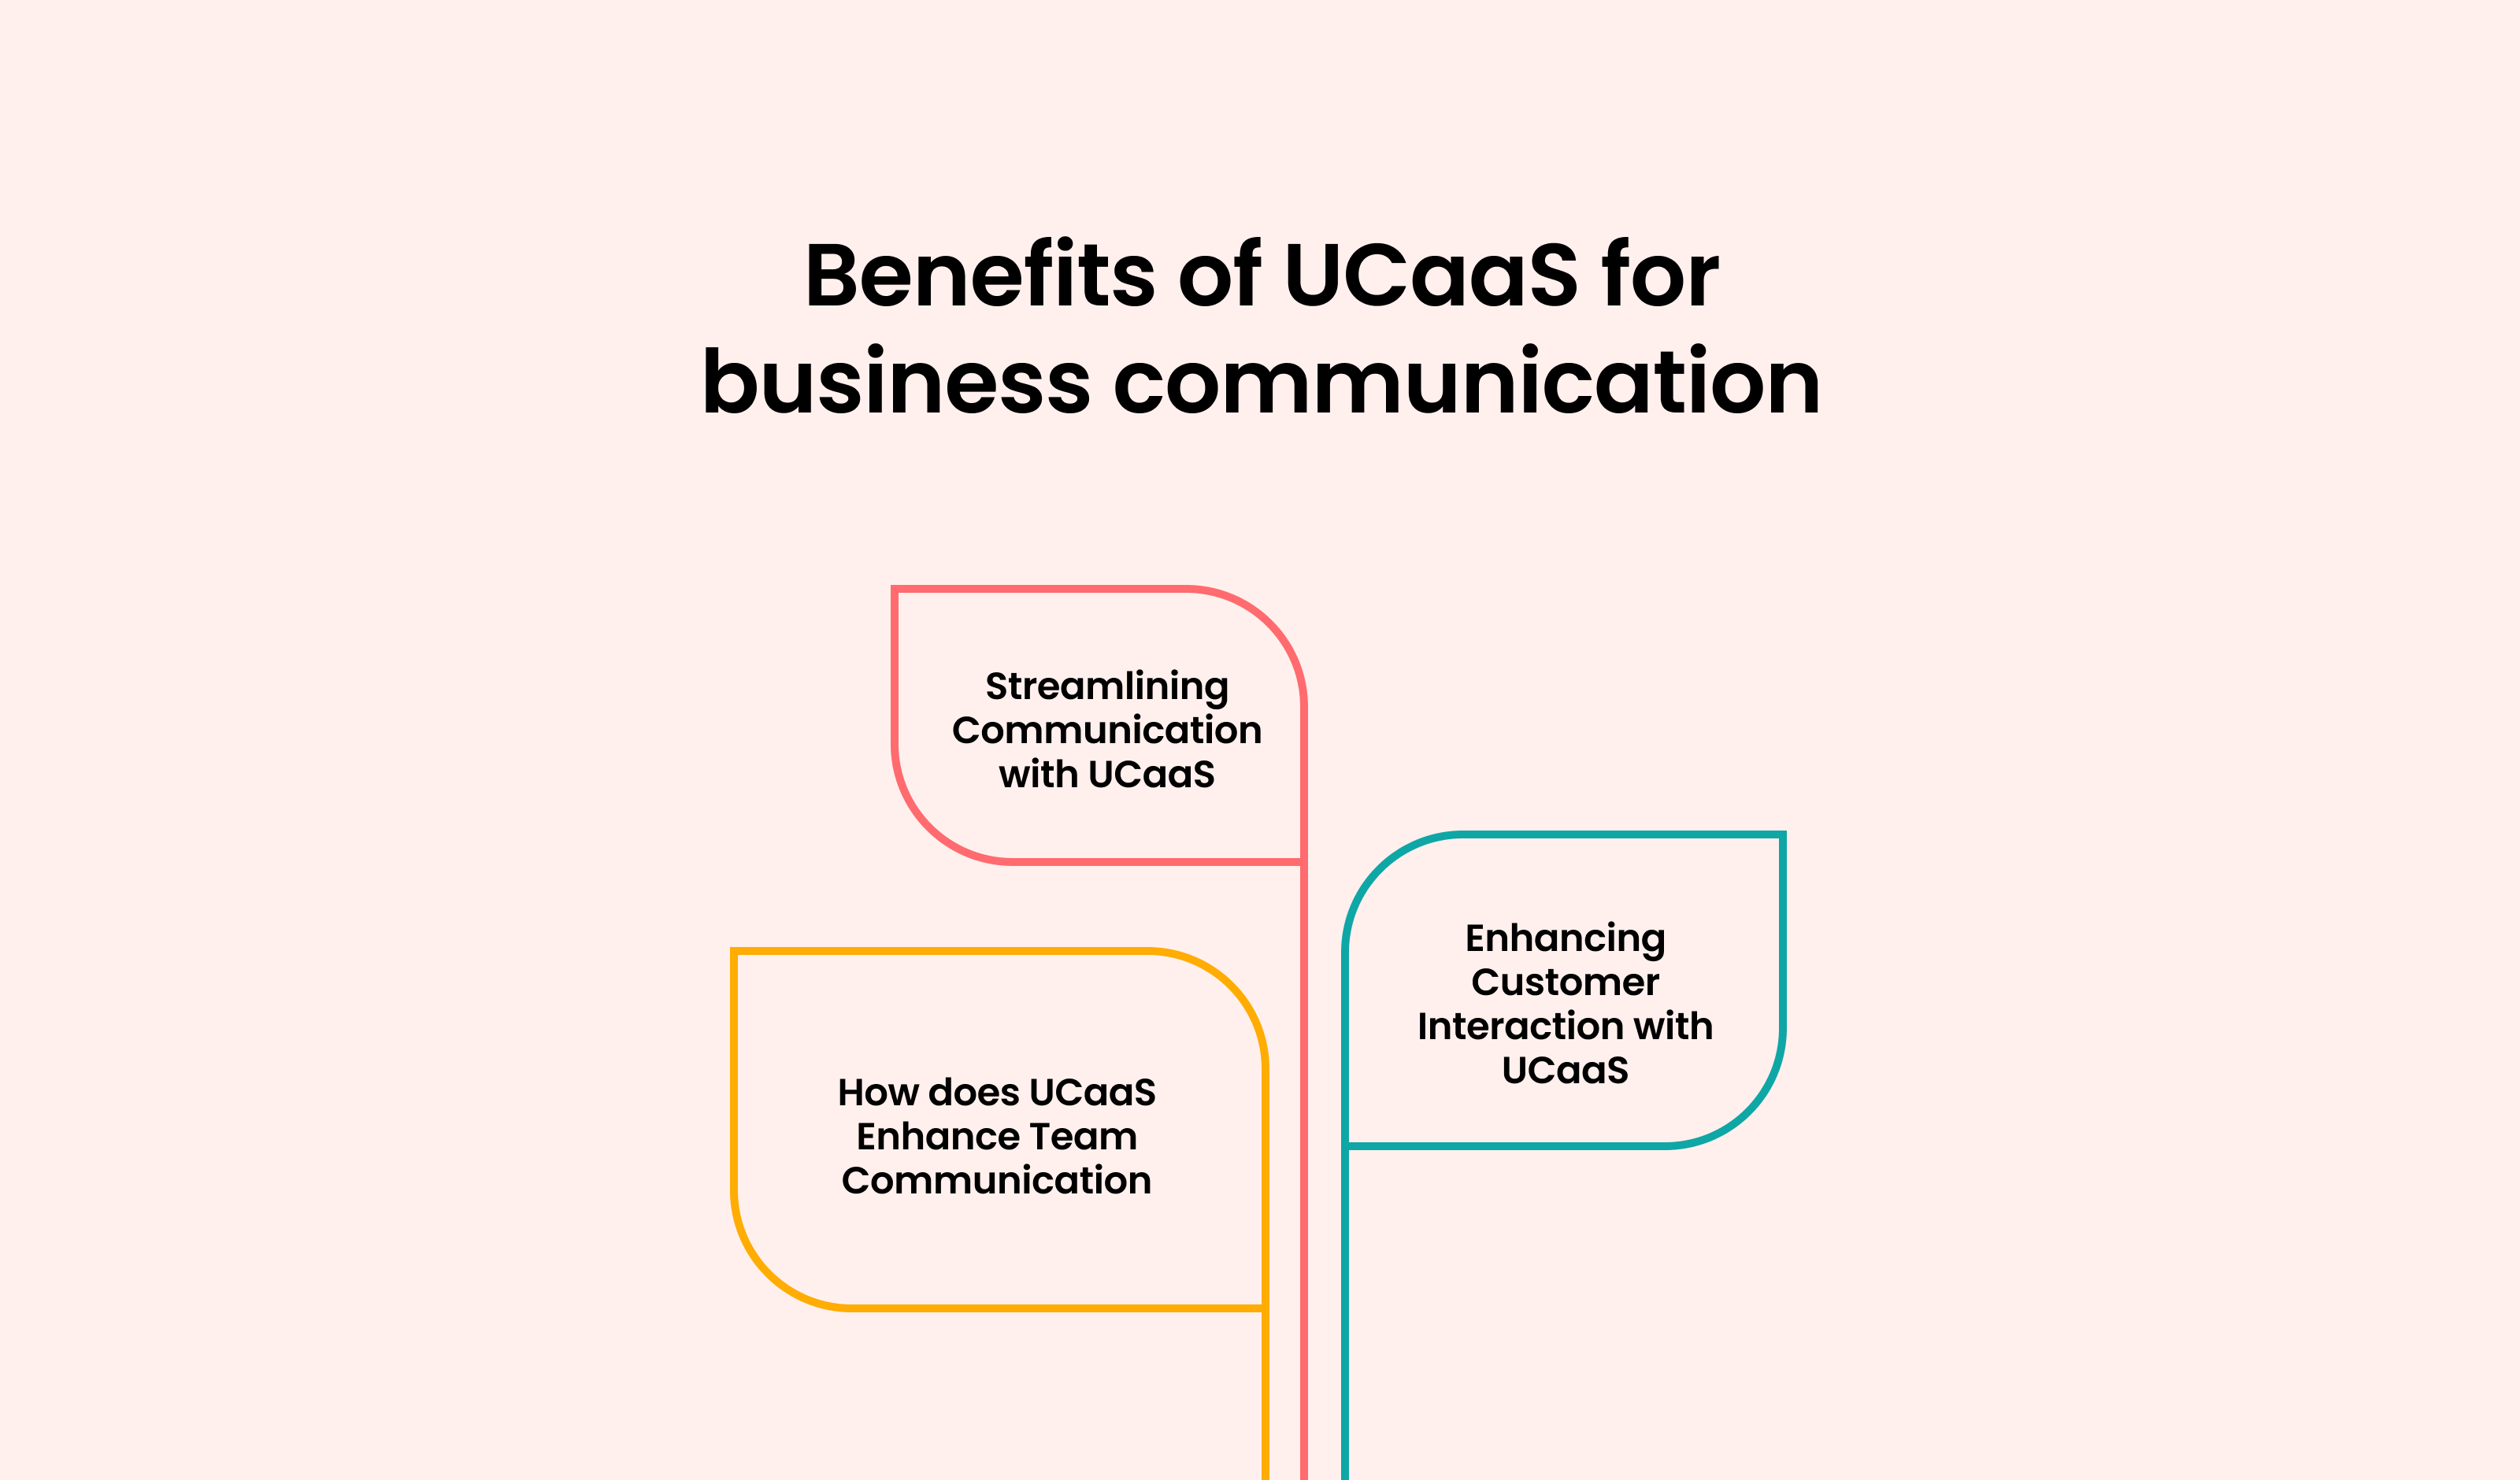  Benefits of UCaaS for Business Communication: